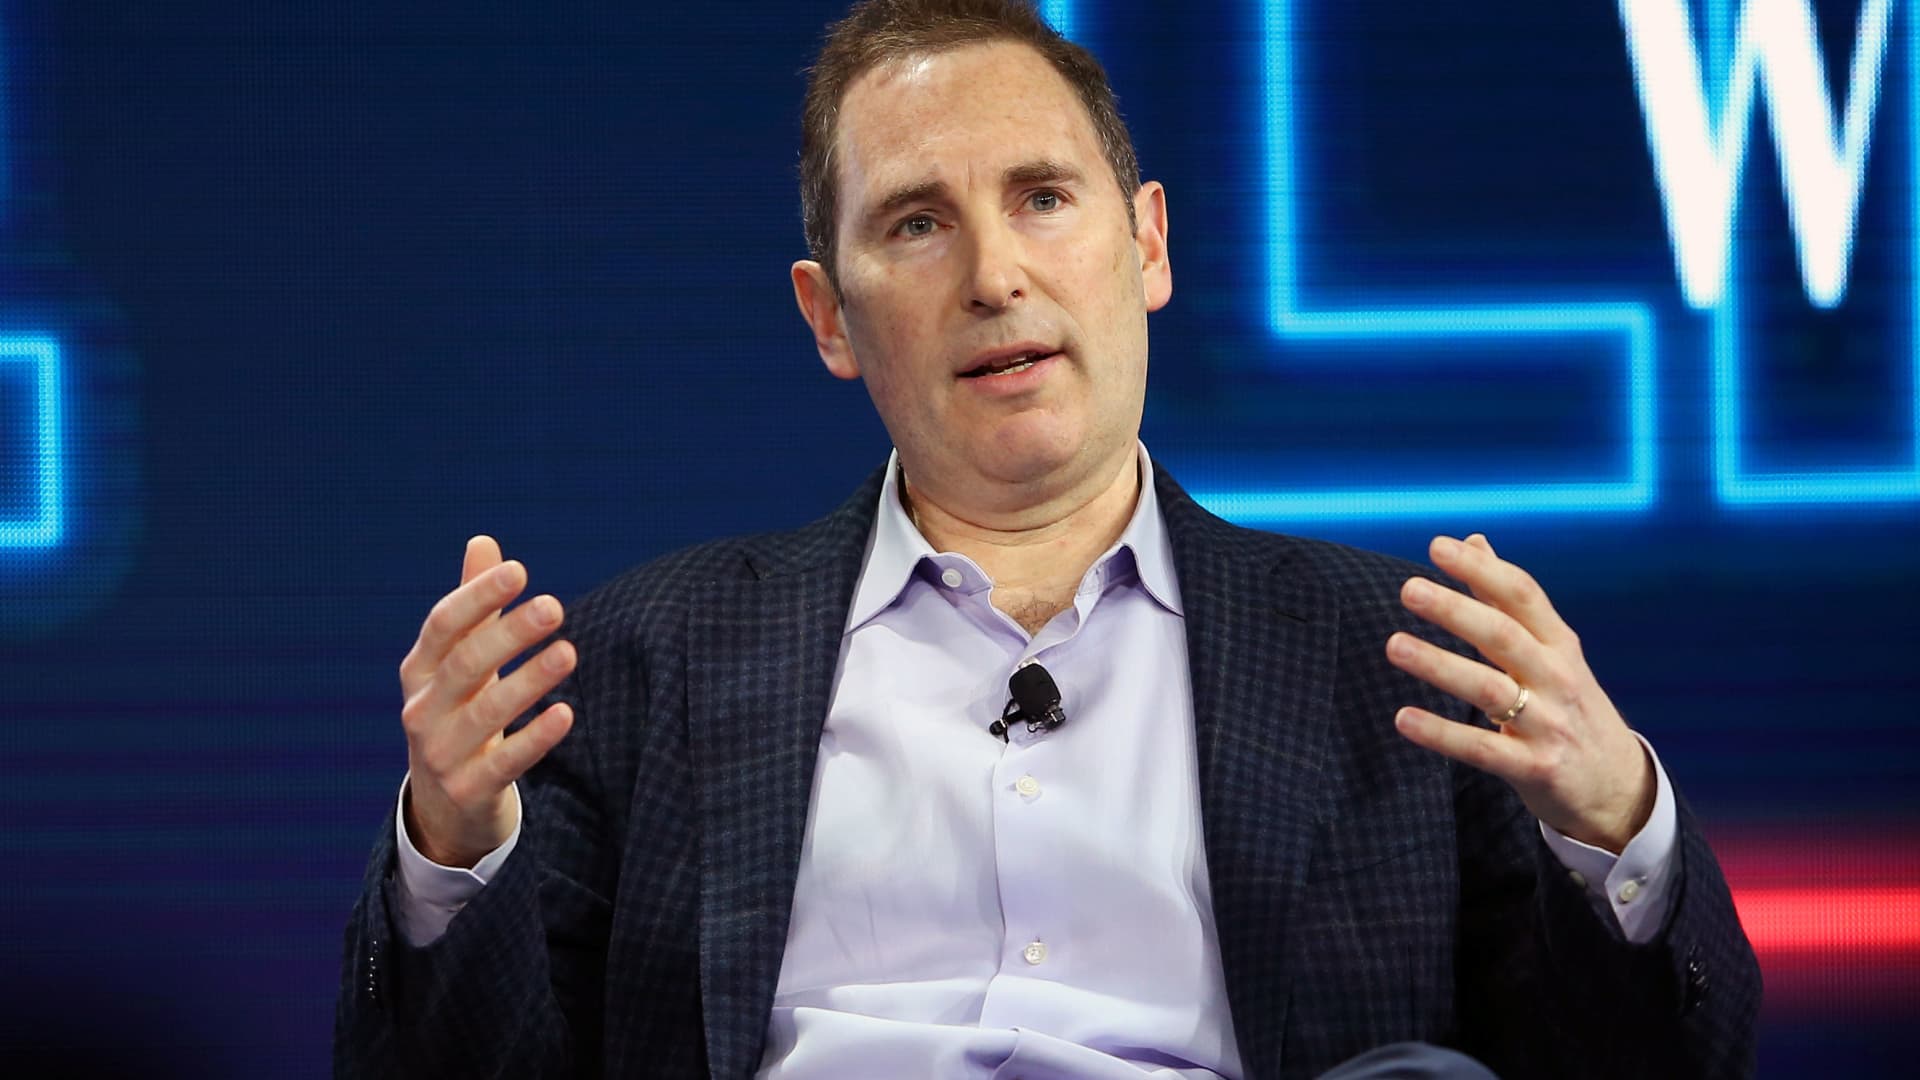 Amazon CEO Andy Jassy says he doesn't focus on the company's stock price